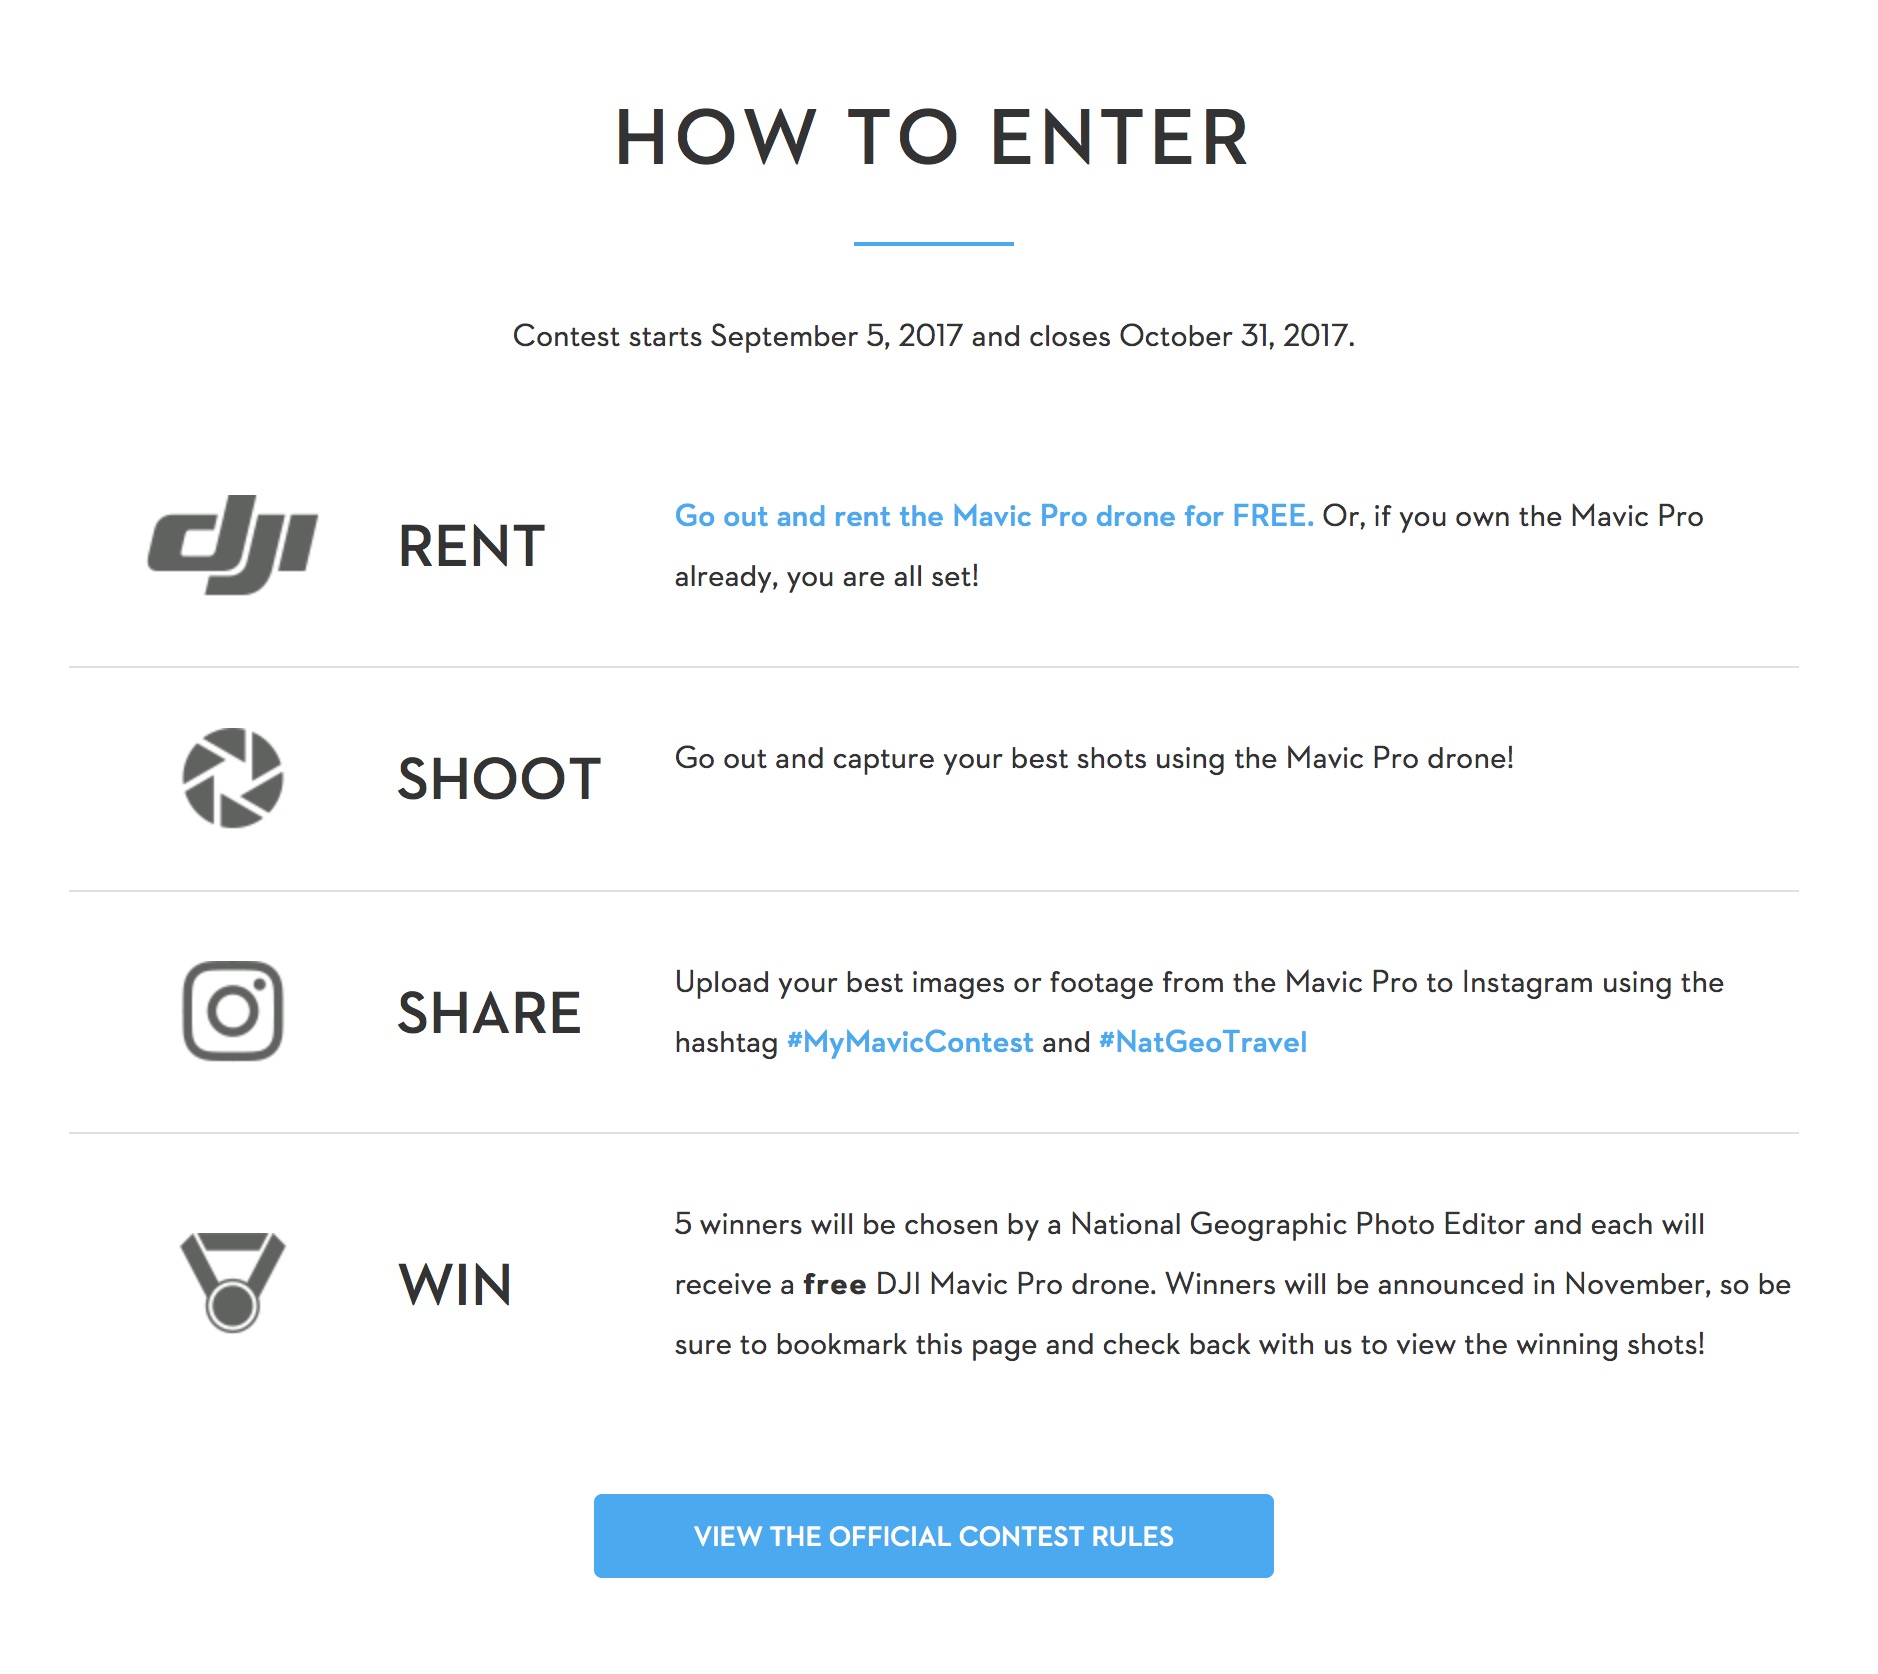 DJI and National Geographic joined forced in photo contest and free drone rental program 2